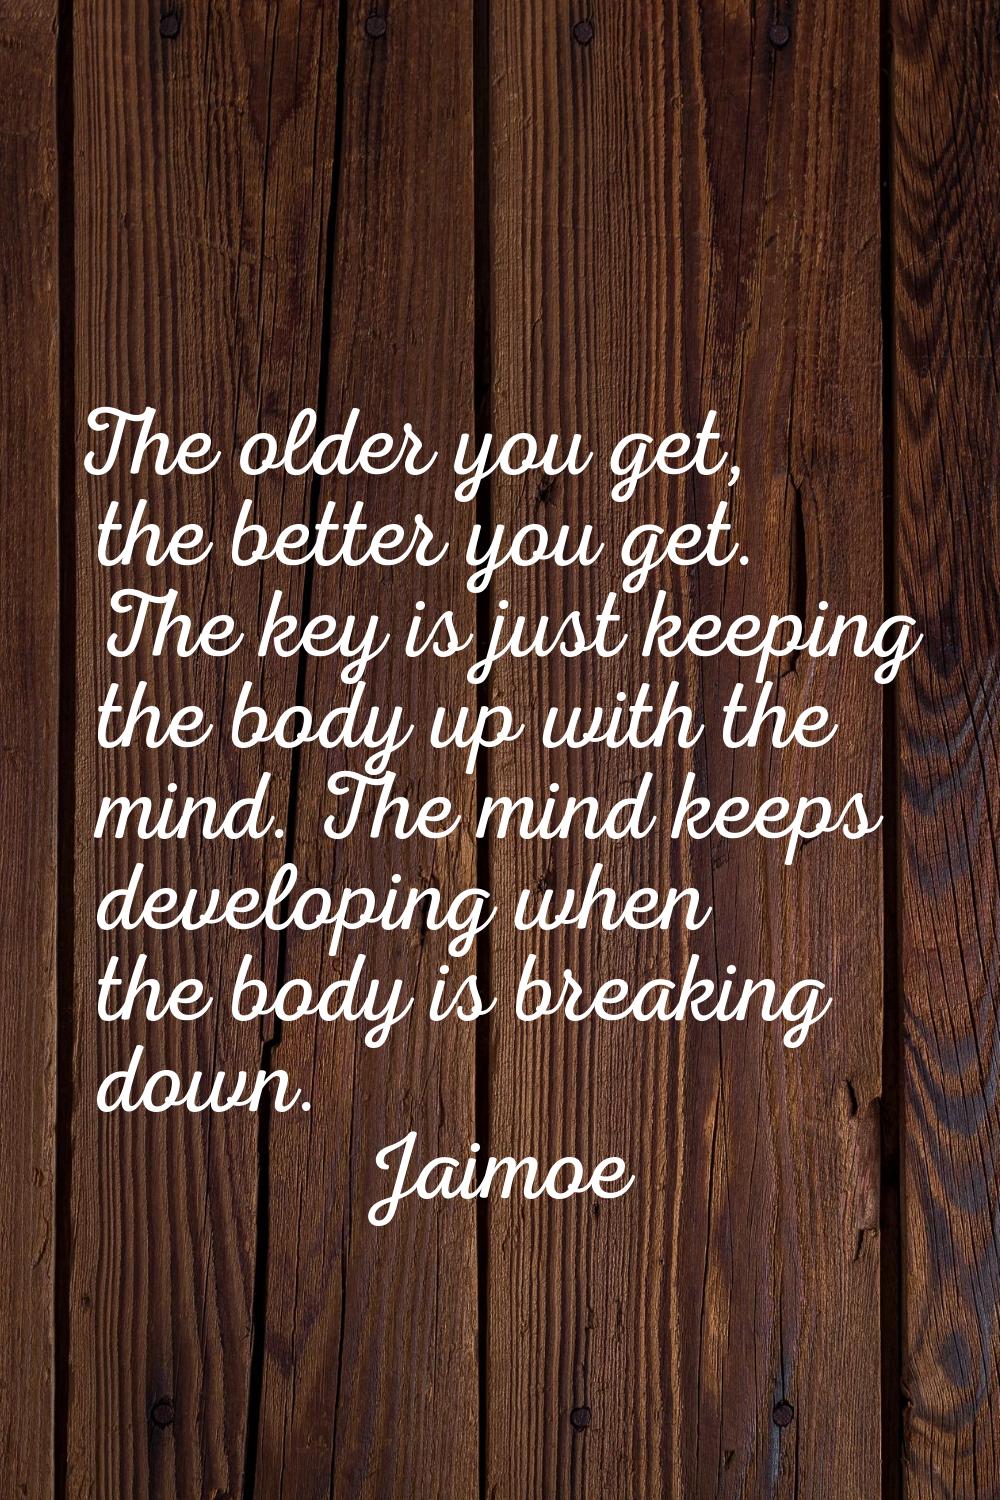 The older you get, the better you get. The key is just keeping the body up with the mind. The mind 